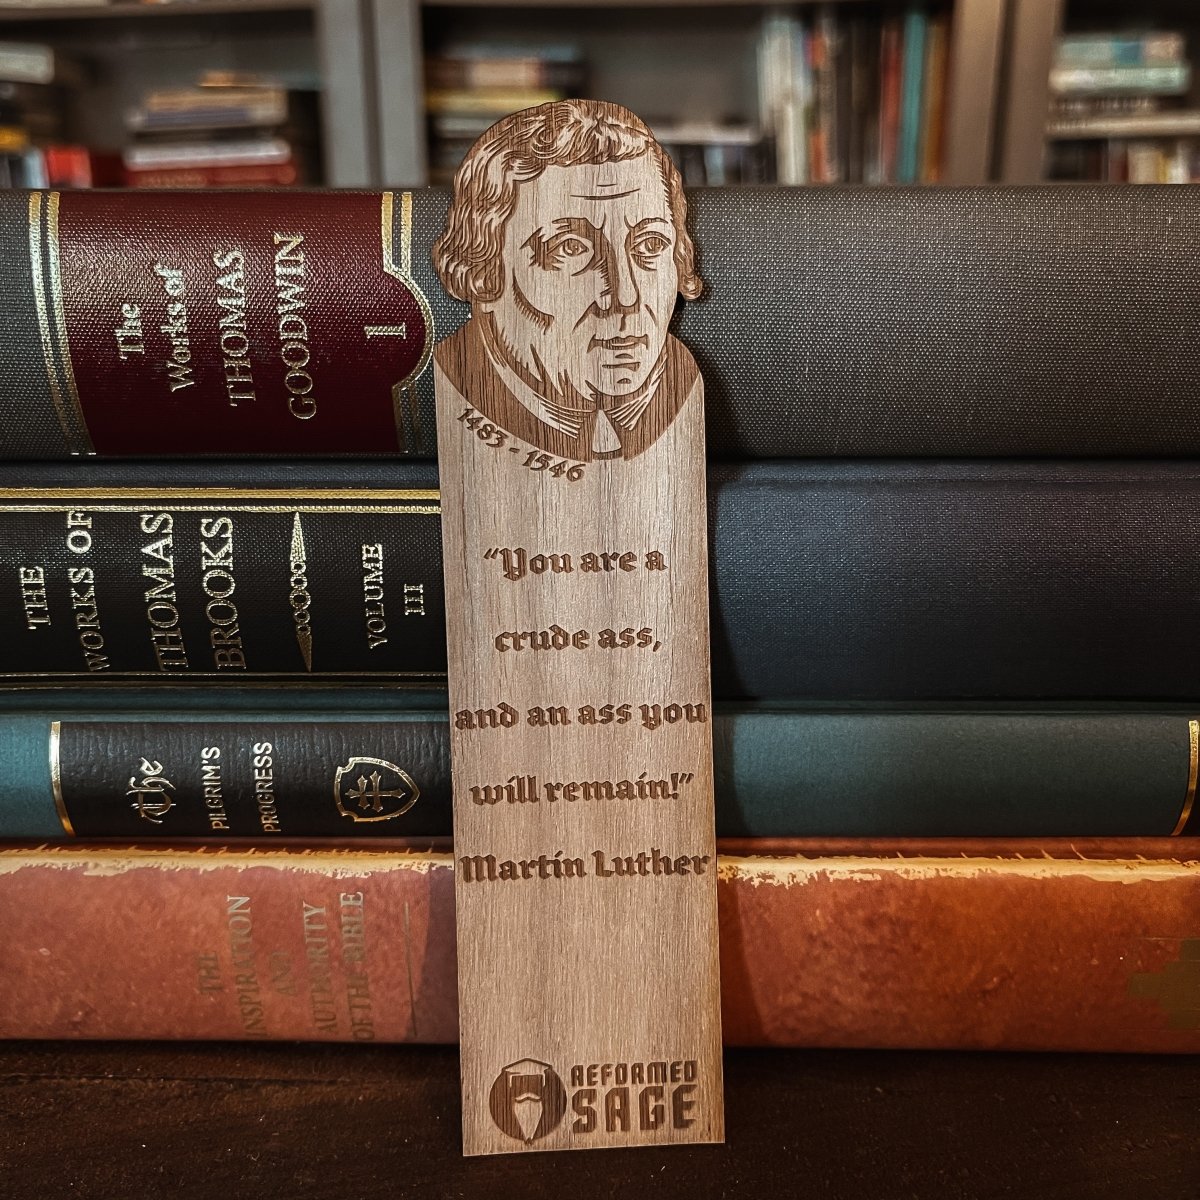 CHRISTIAN BOOKMARKS - Luther's Wit - The Reformed Sage - #reformed# - #reformed_gifts# - #christian_gifts#